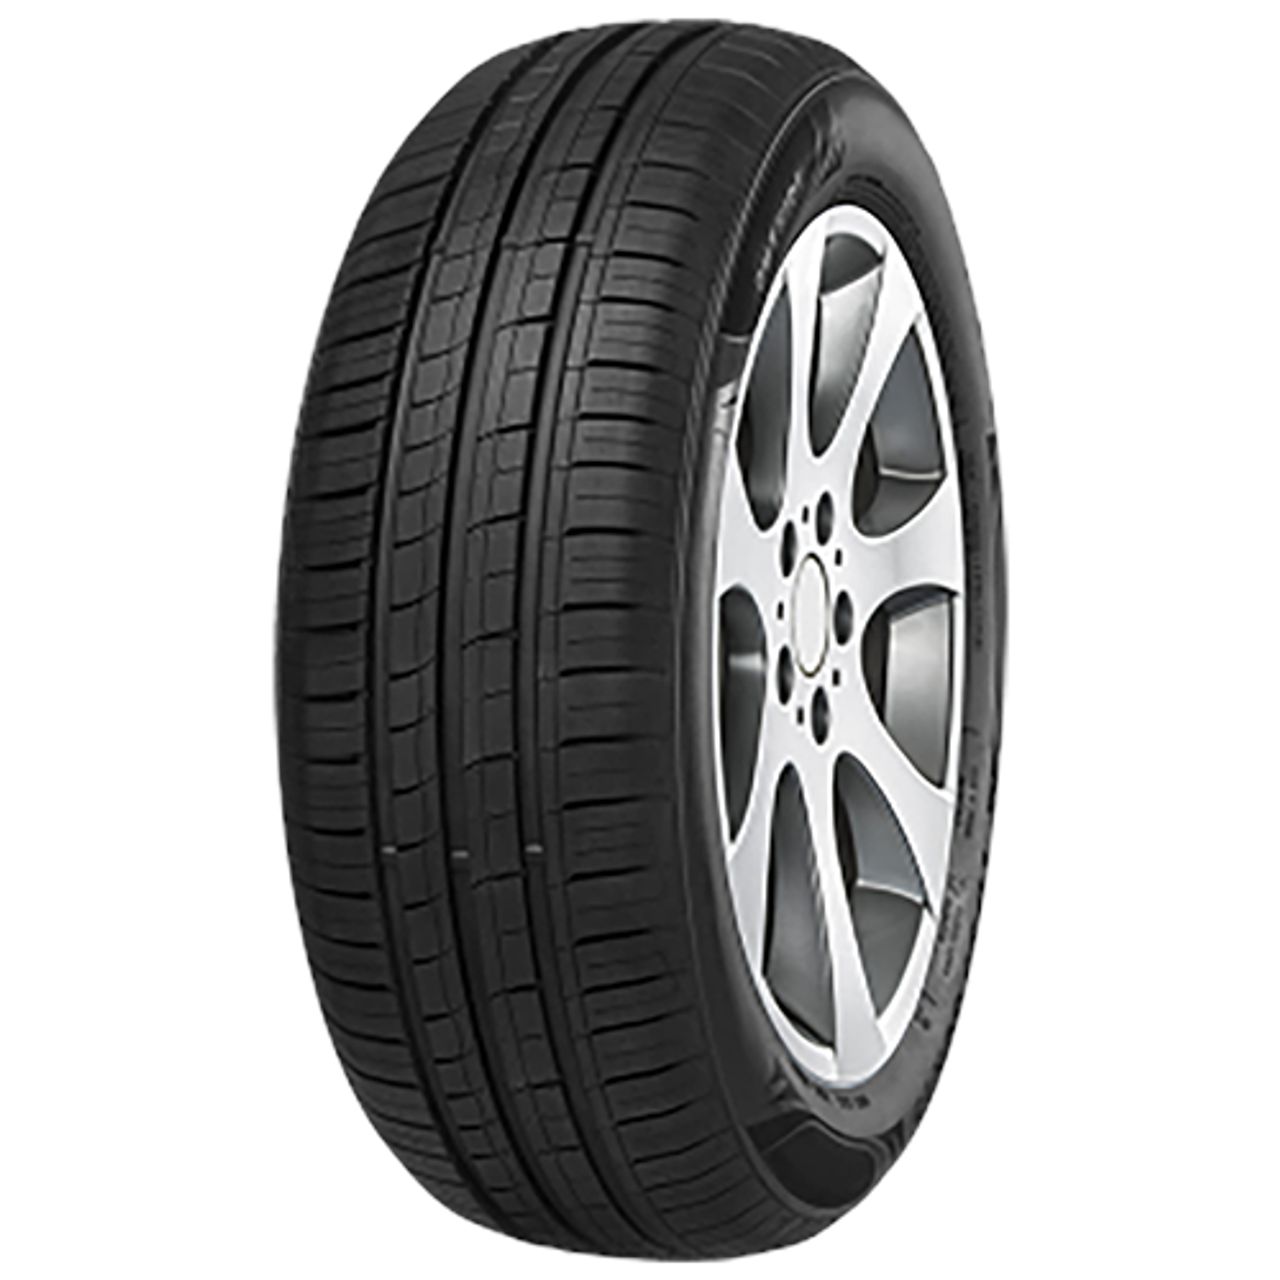 IMPERIAL ECODRIVER 4 145/80R12 74T BSW